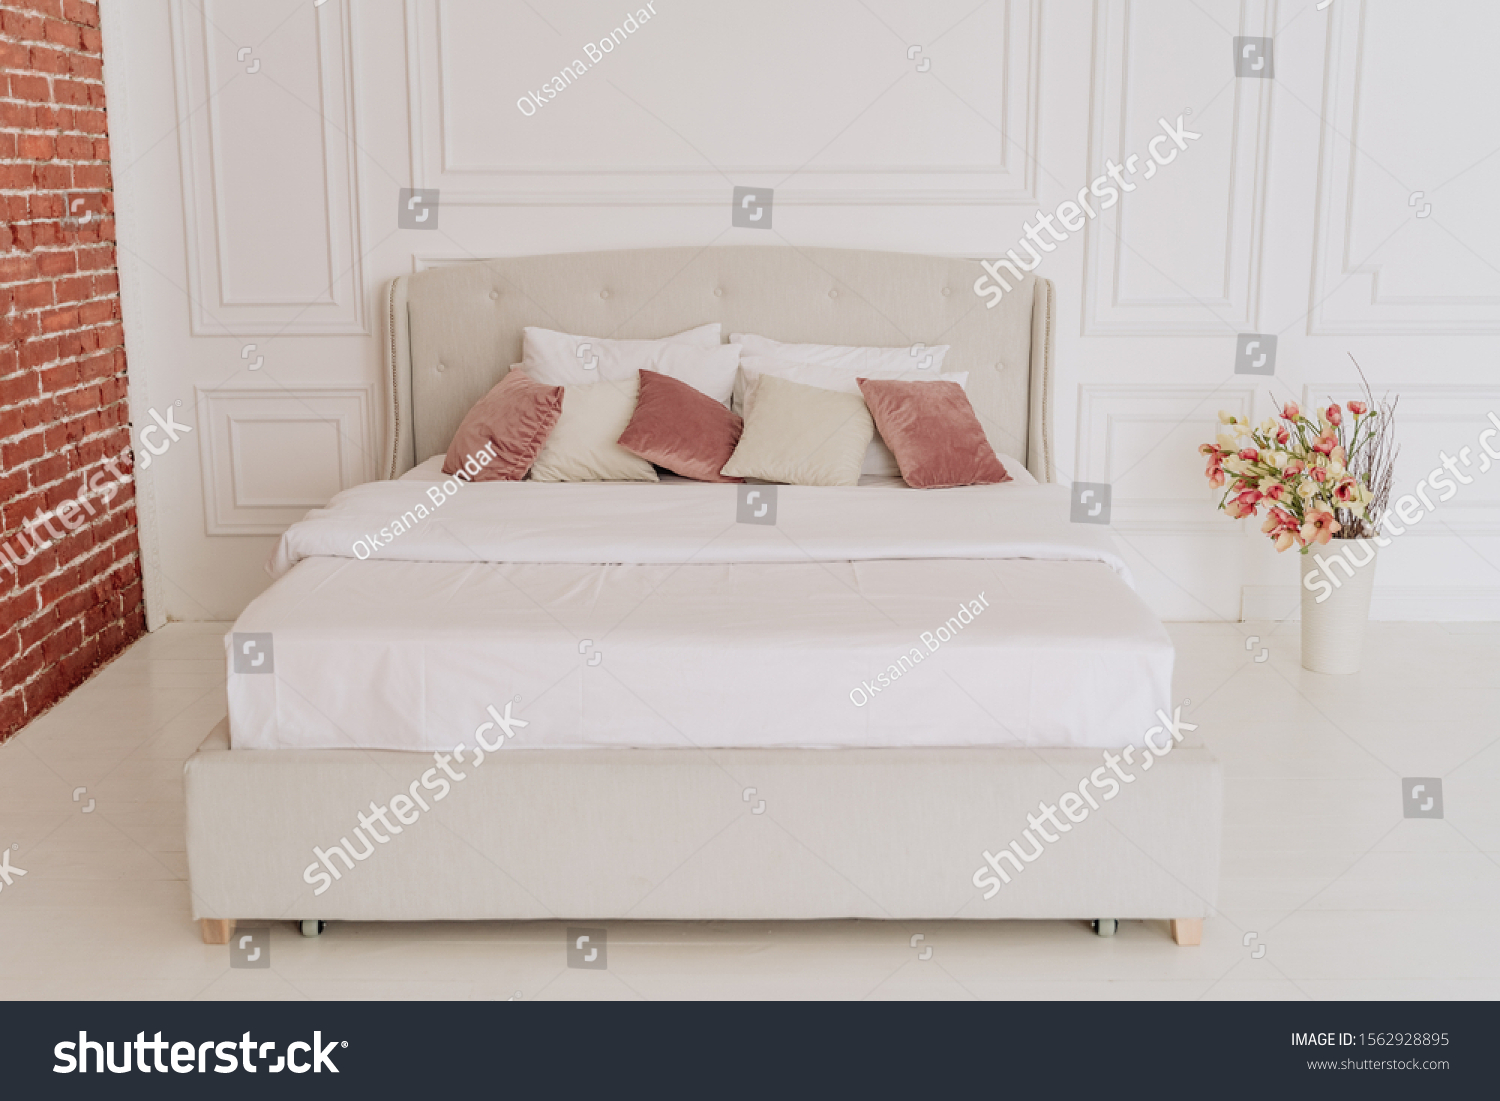 the brick twin bed